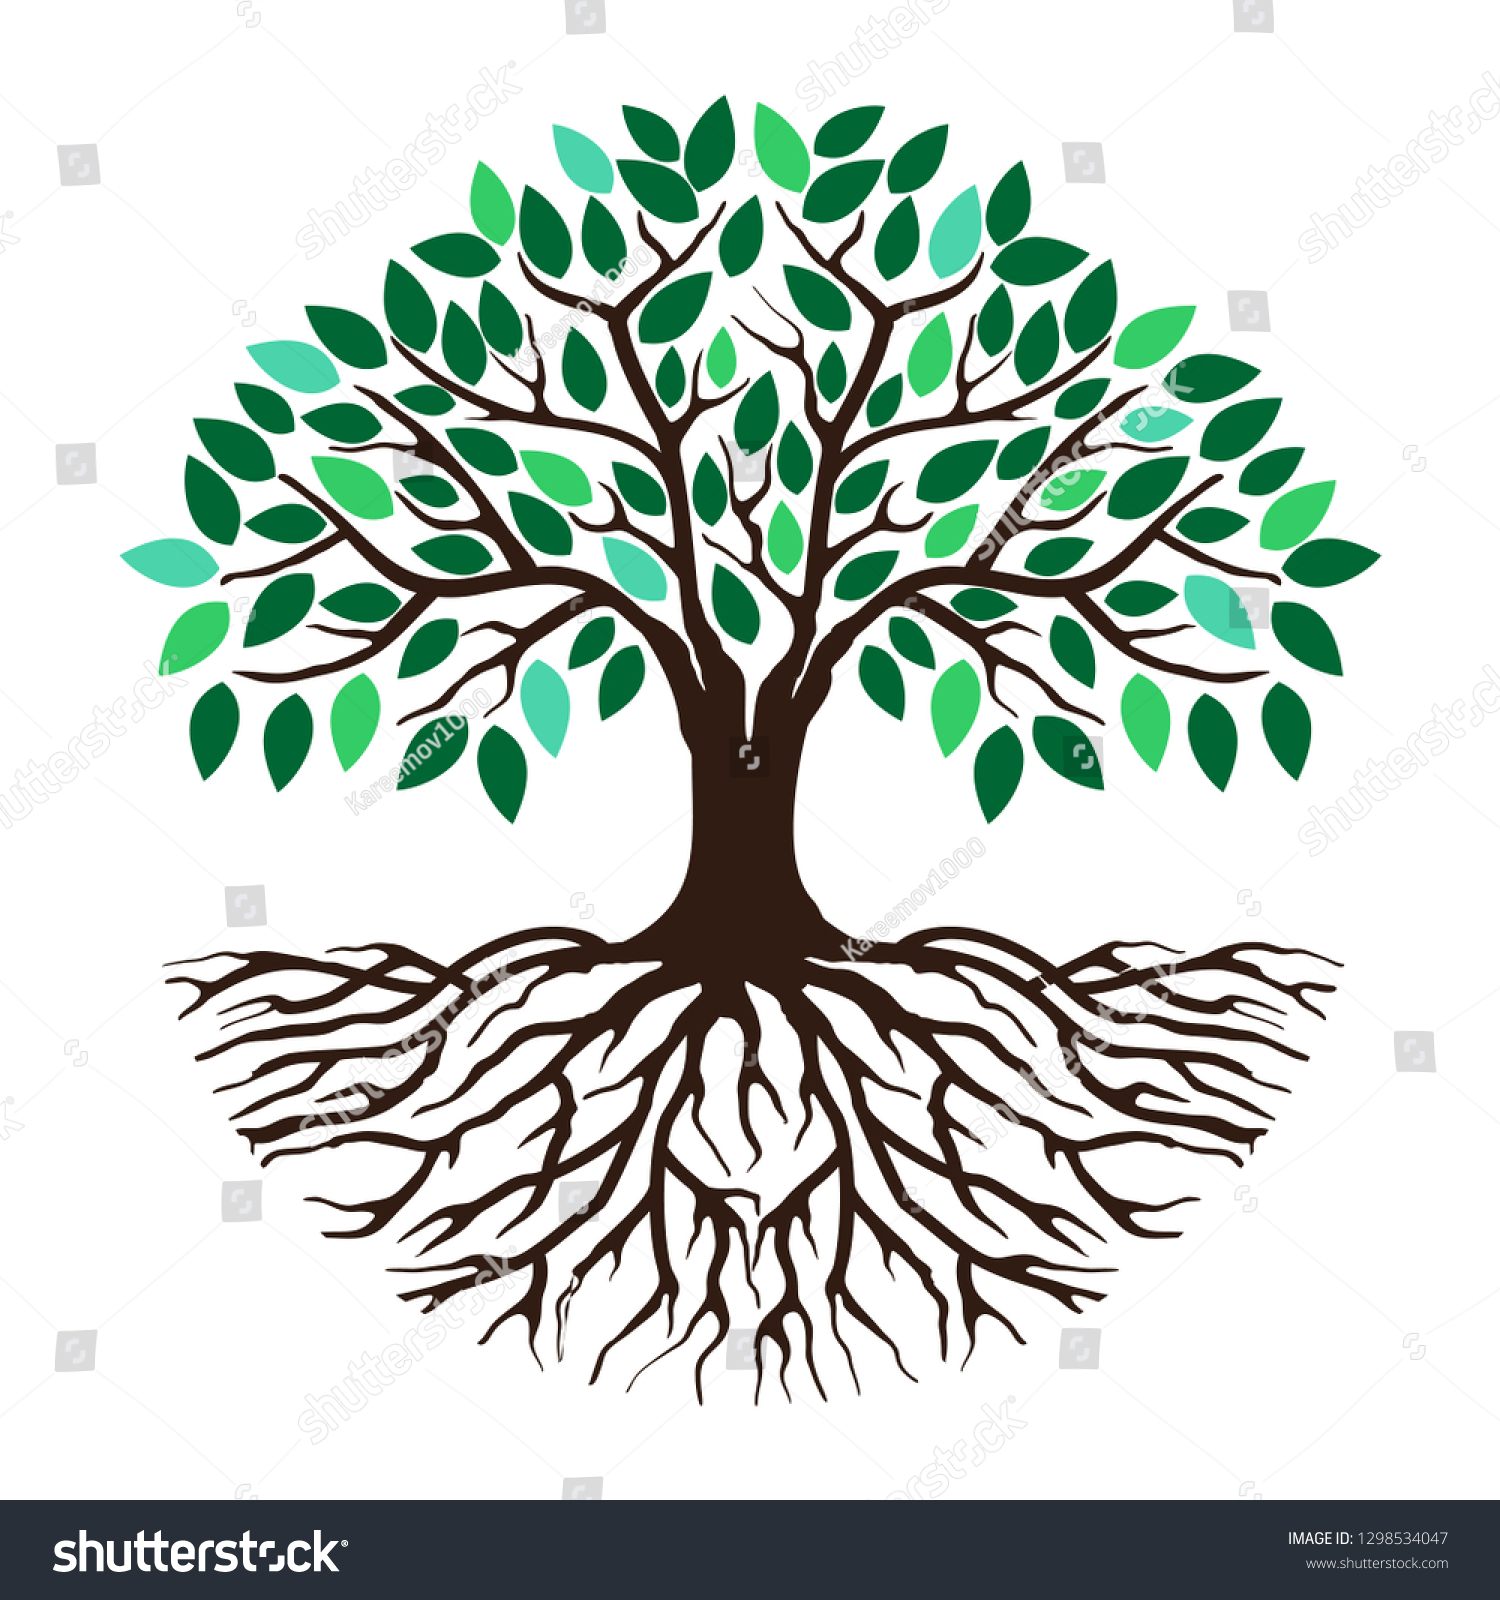 SVG of abstract vibrant tree logo and roots design illustration svg